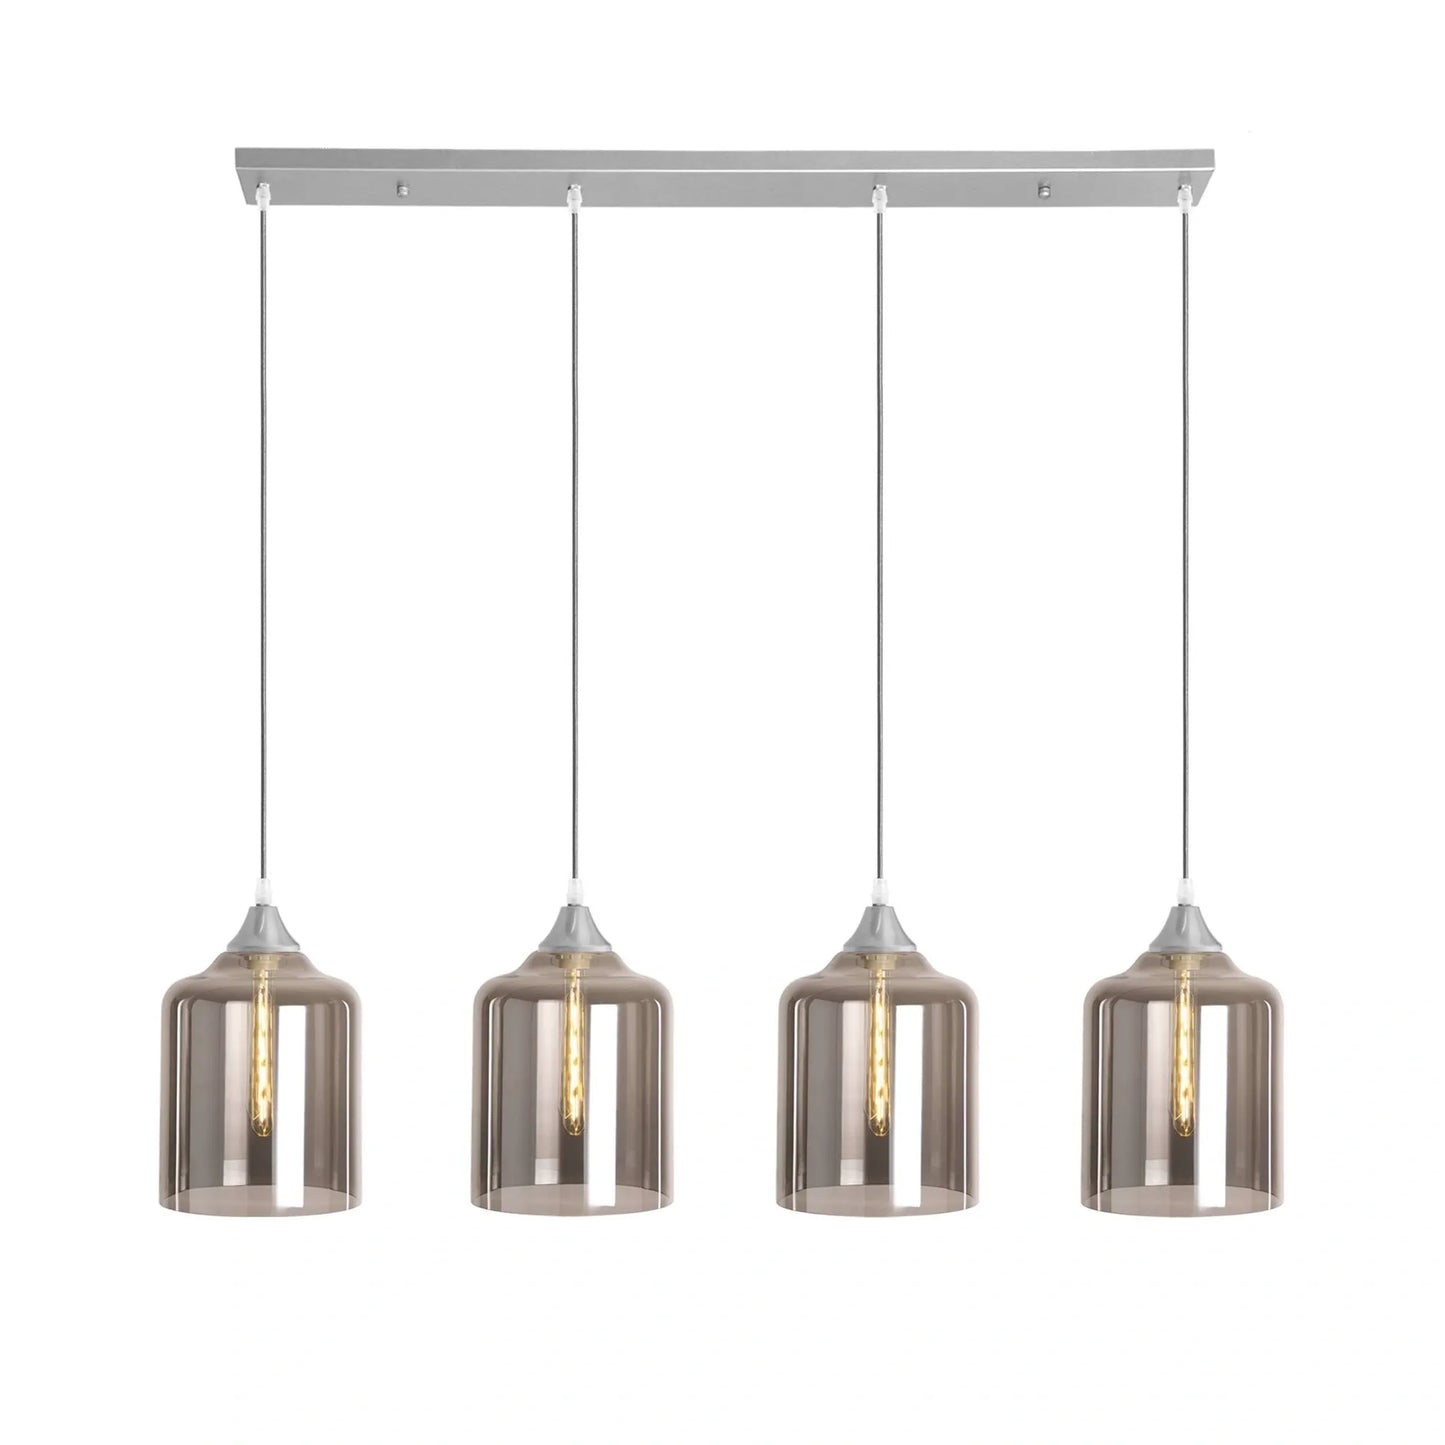 Murano 4 Light Silver Bar With Extra Large Cylinder Glass shades